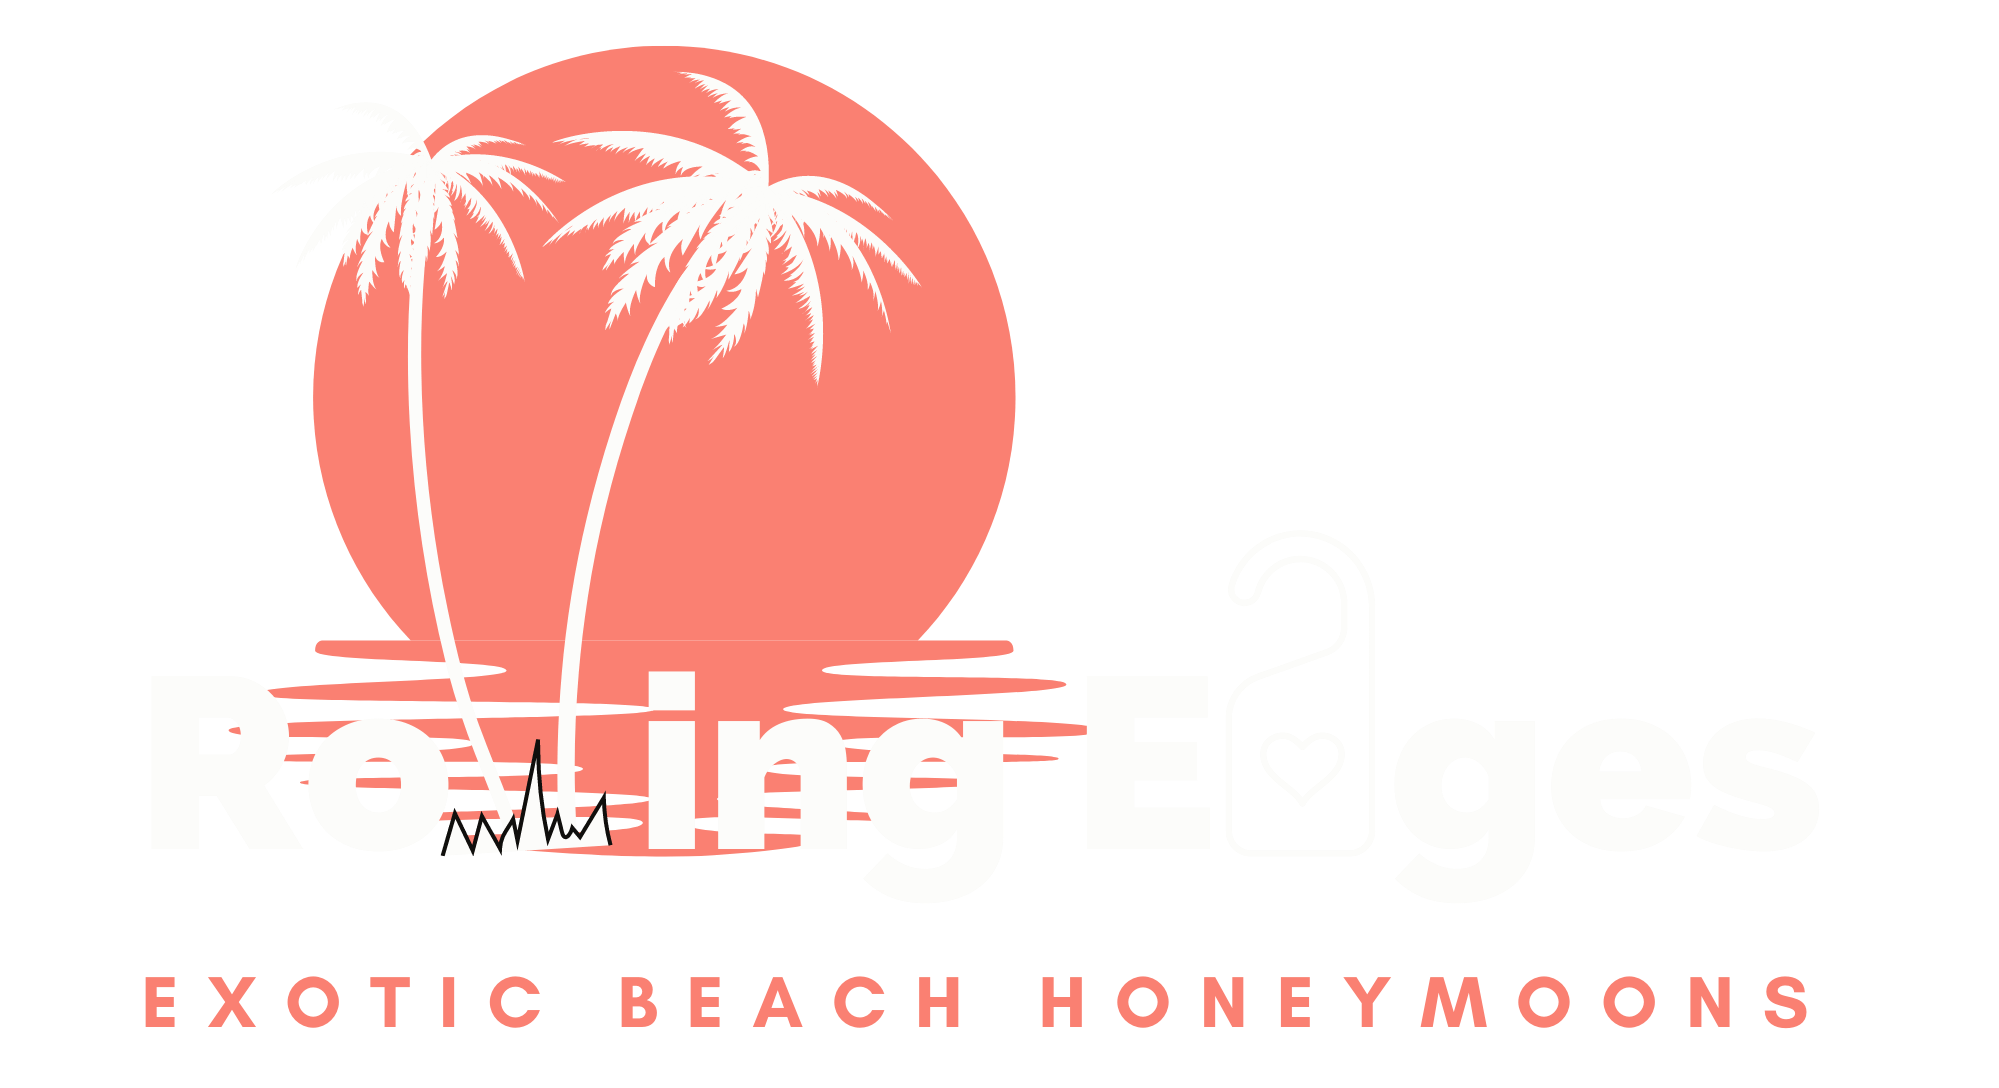 rolling edges honeymoon tour packages